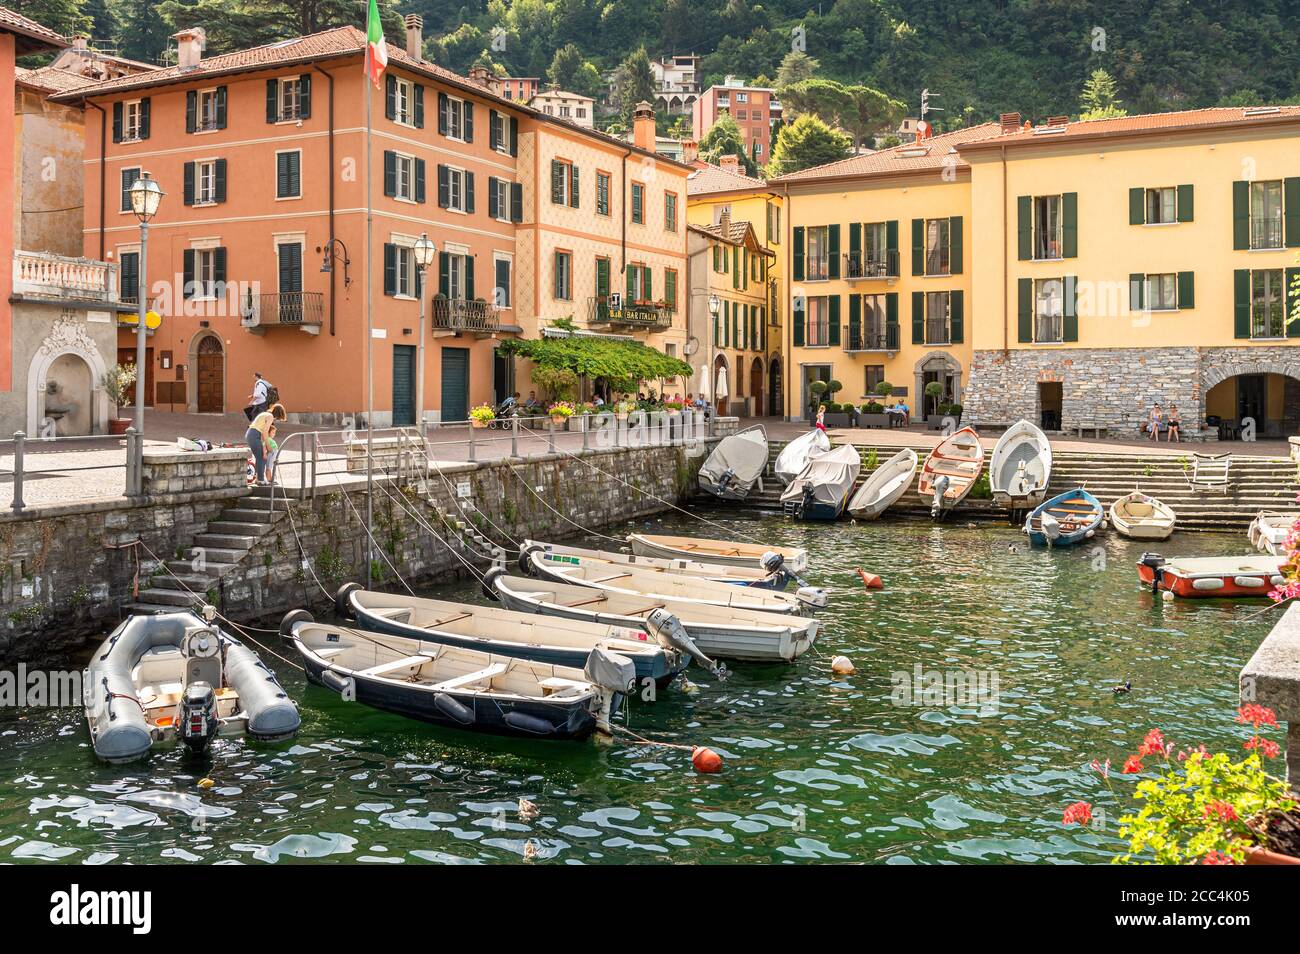 Torno, Lombardy, Italy - July 8, 2019: Central square of ancient village Torno overlooking Lake Como, Italy Stock Photo